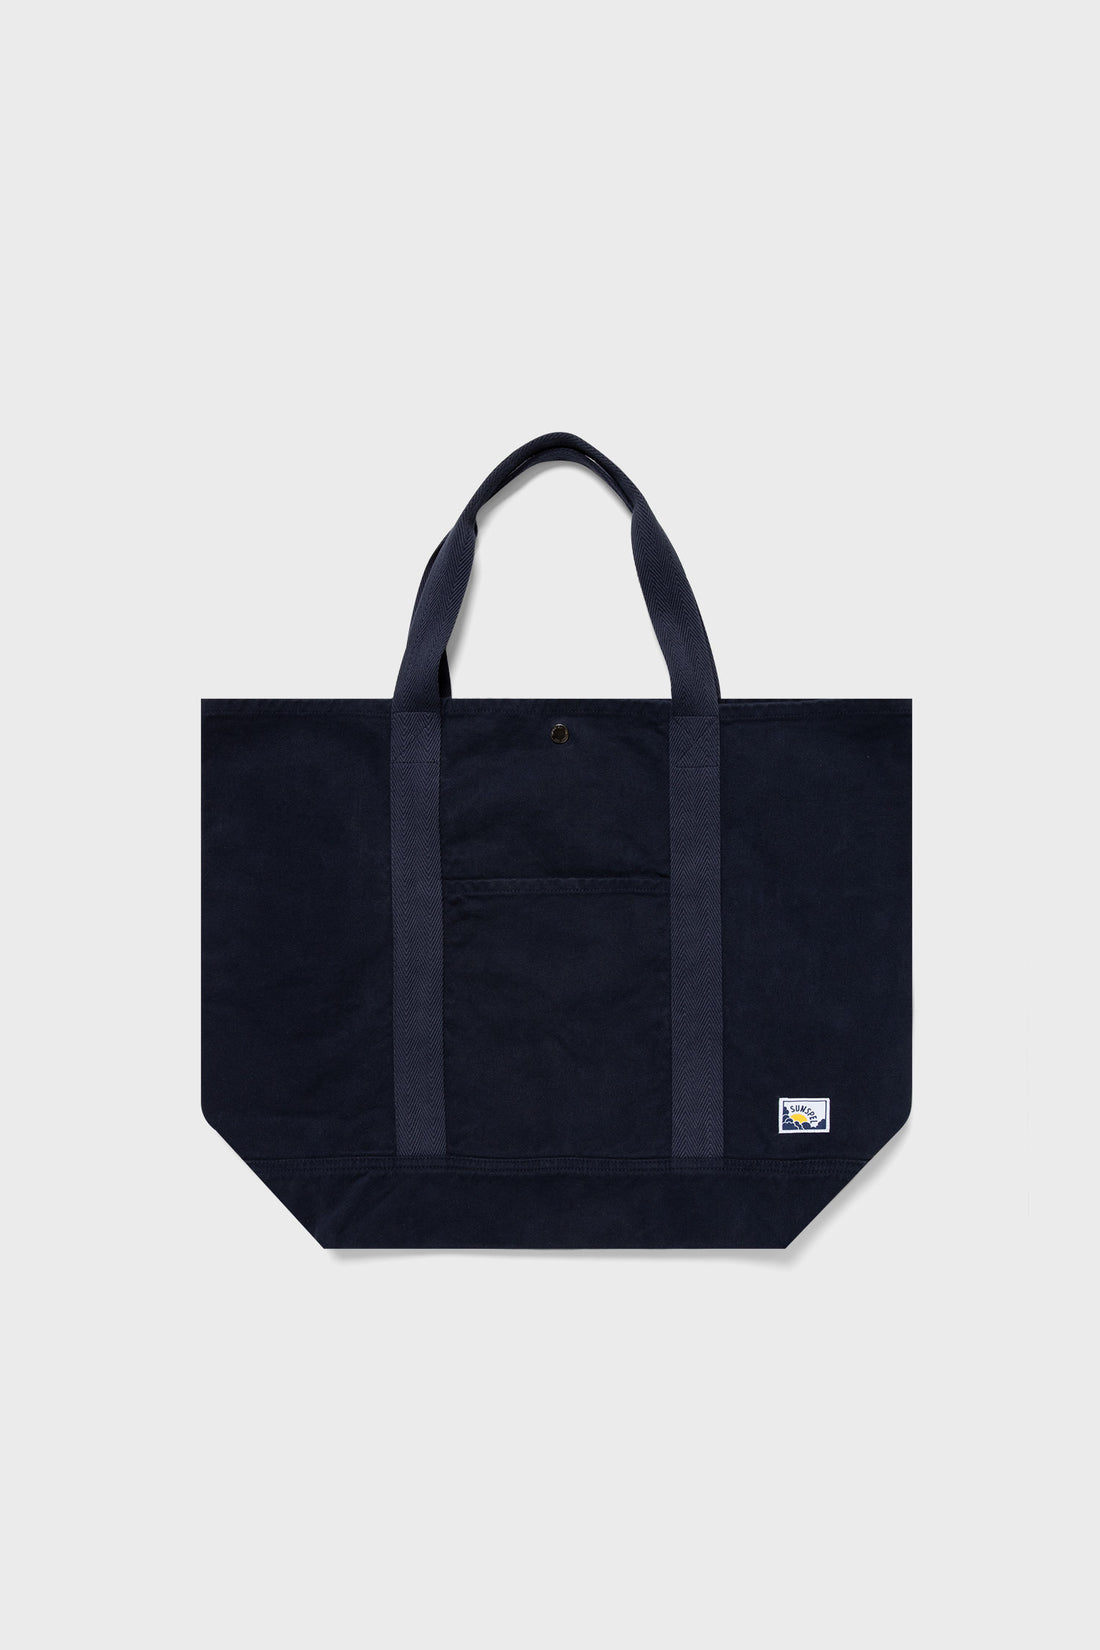 Large Tote in Navy